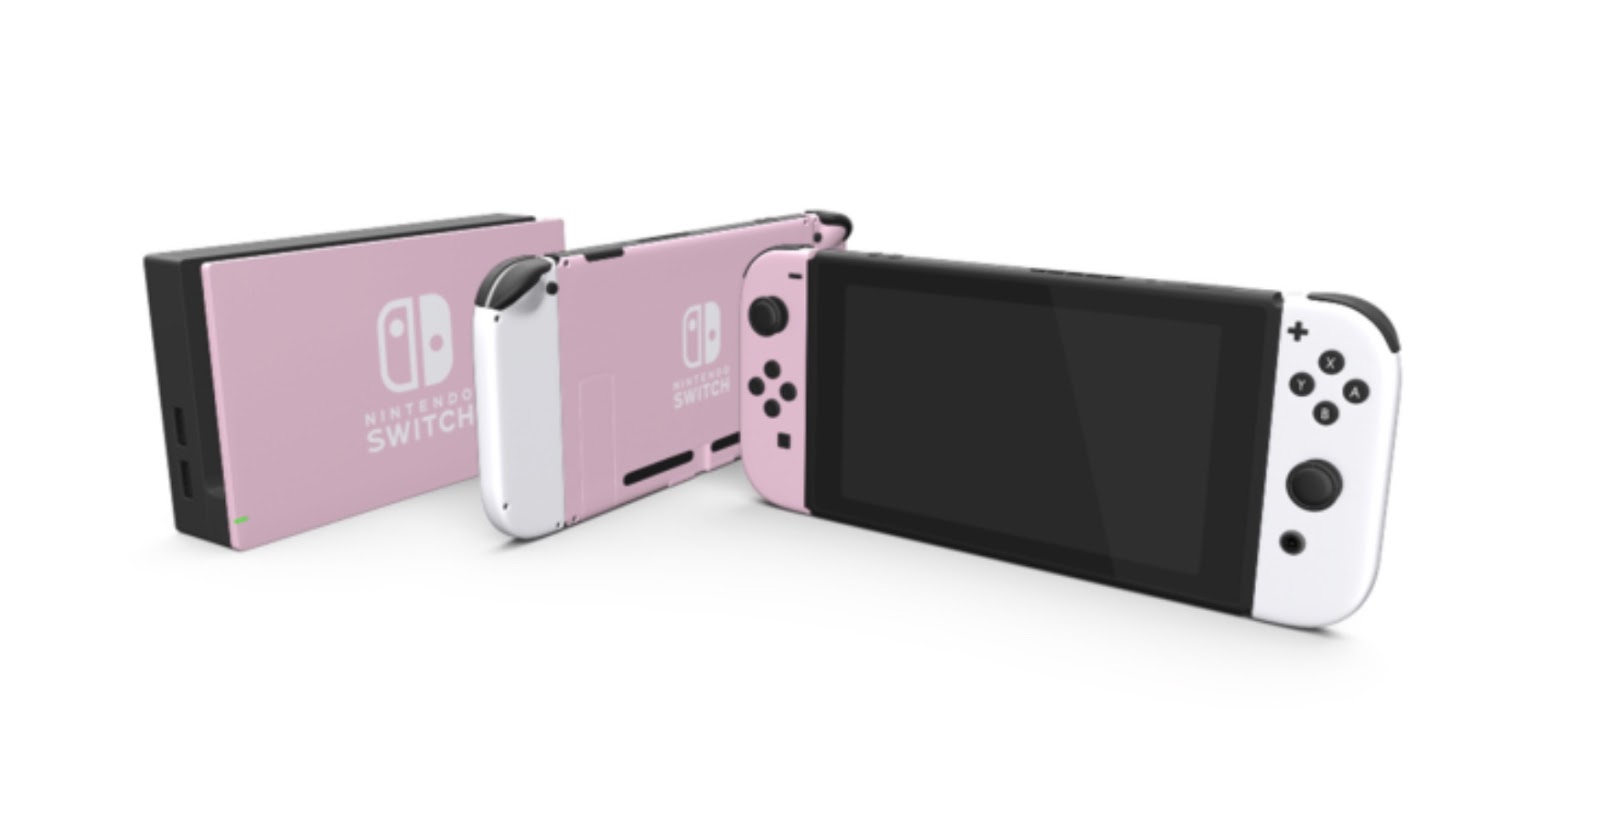 My Darling Rainbow: So, I have a Pink Nintendo Switch